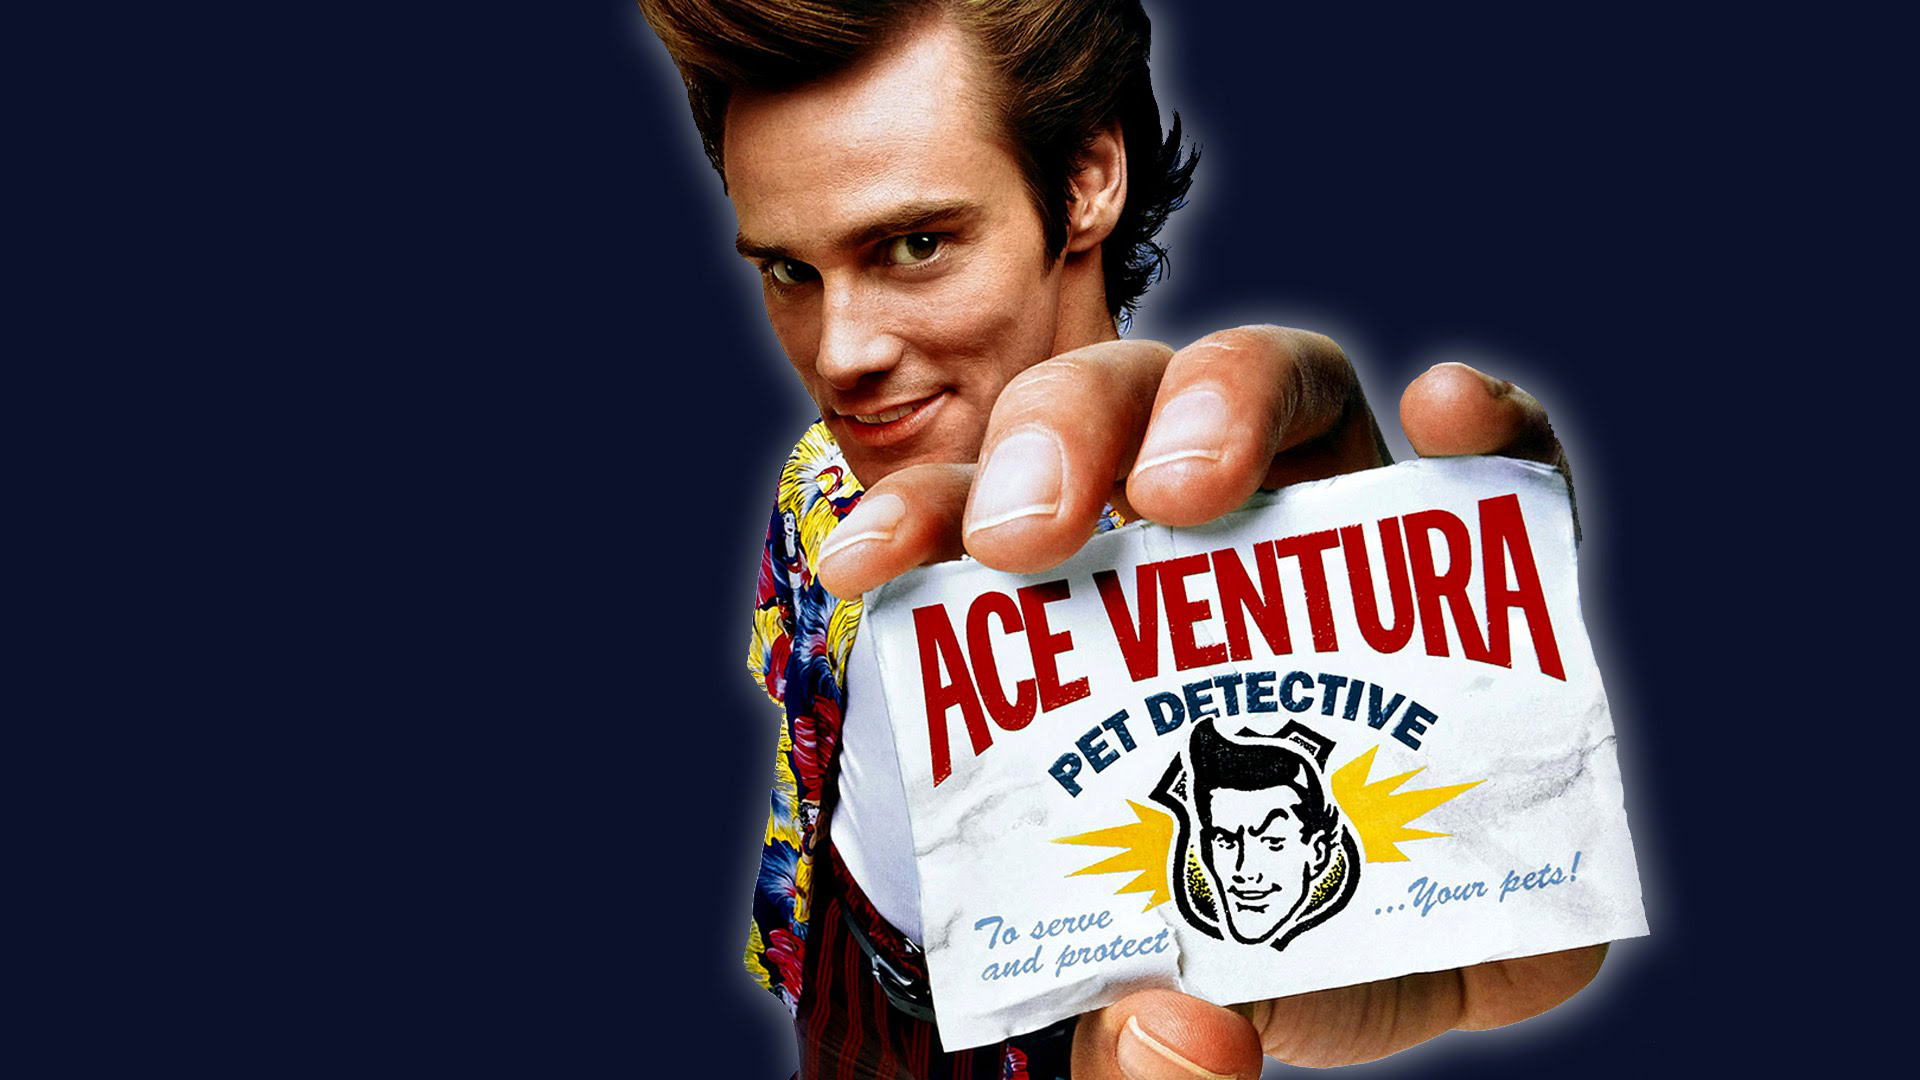 Ace Ventura: A detective who specializes in recovering lost pets, hired to find the Miami Dolphins' mascot. 1920x1080 Full HD Wallpaper.